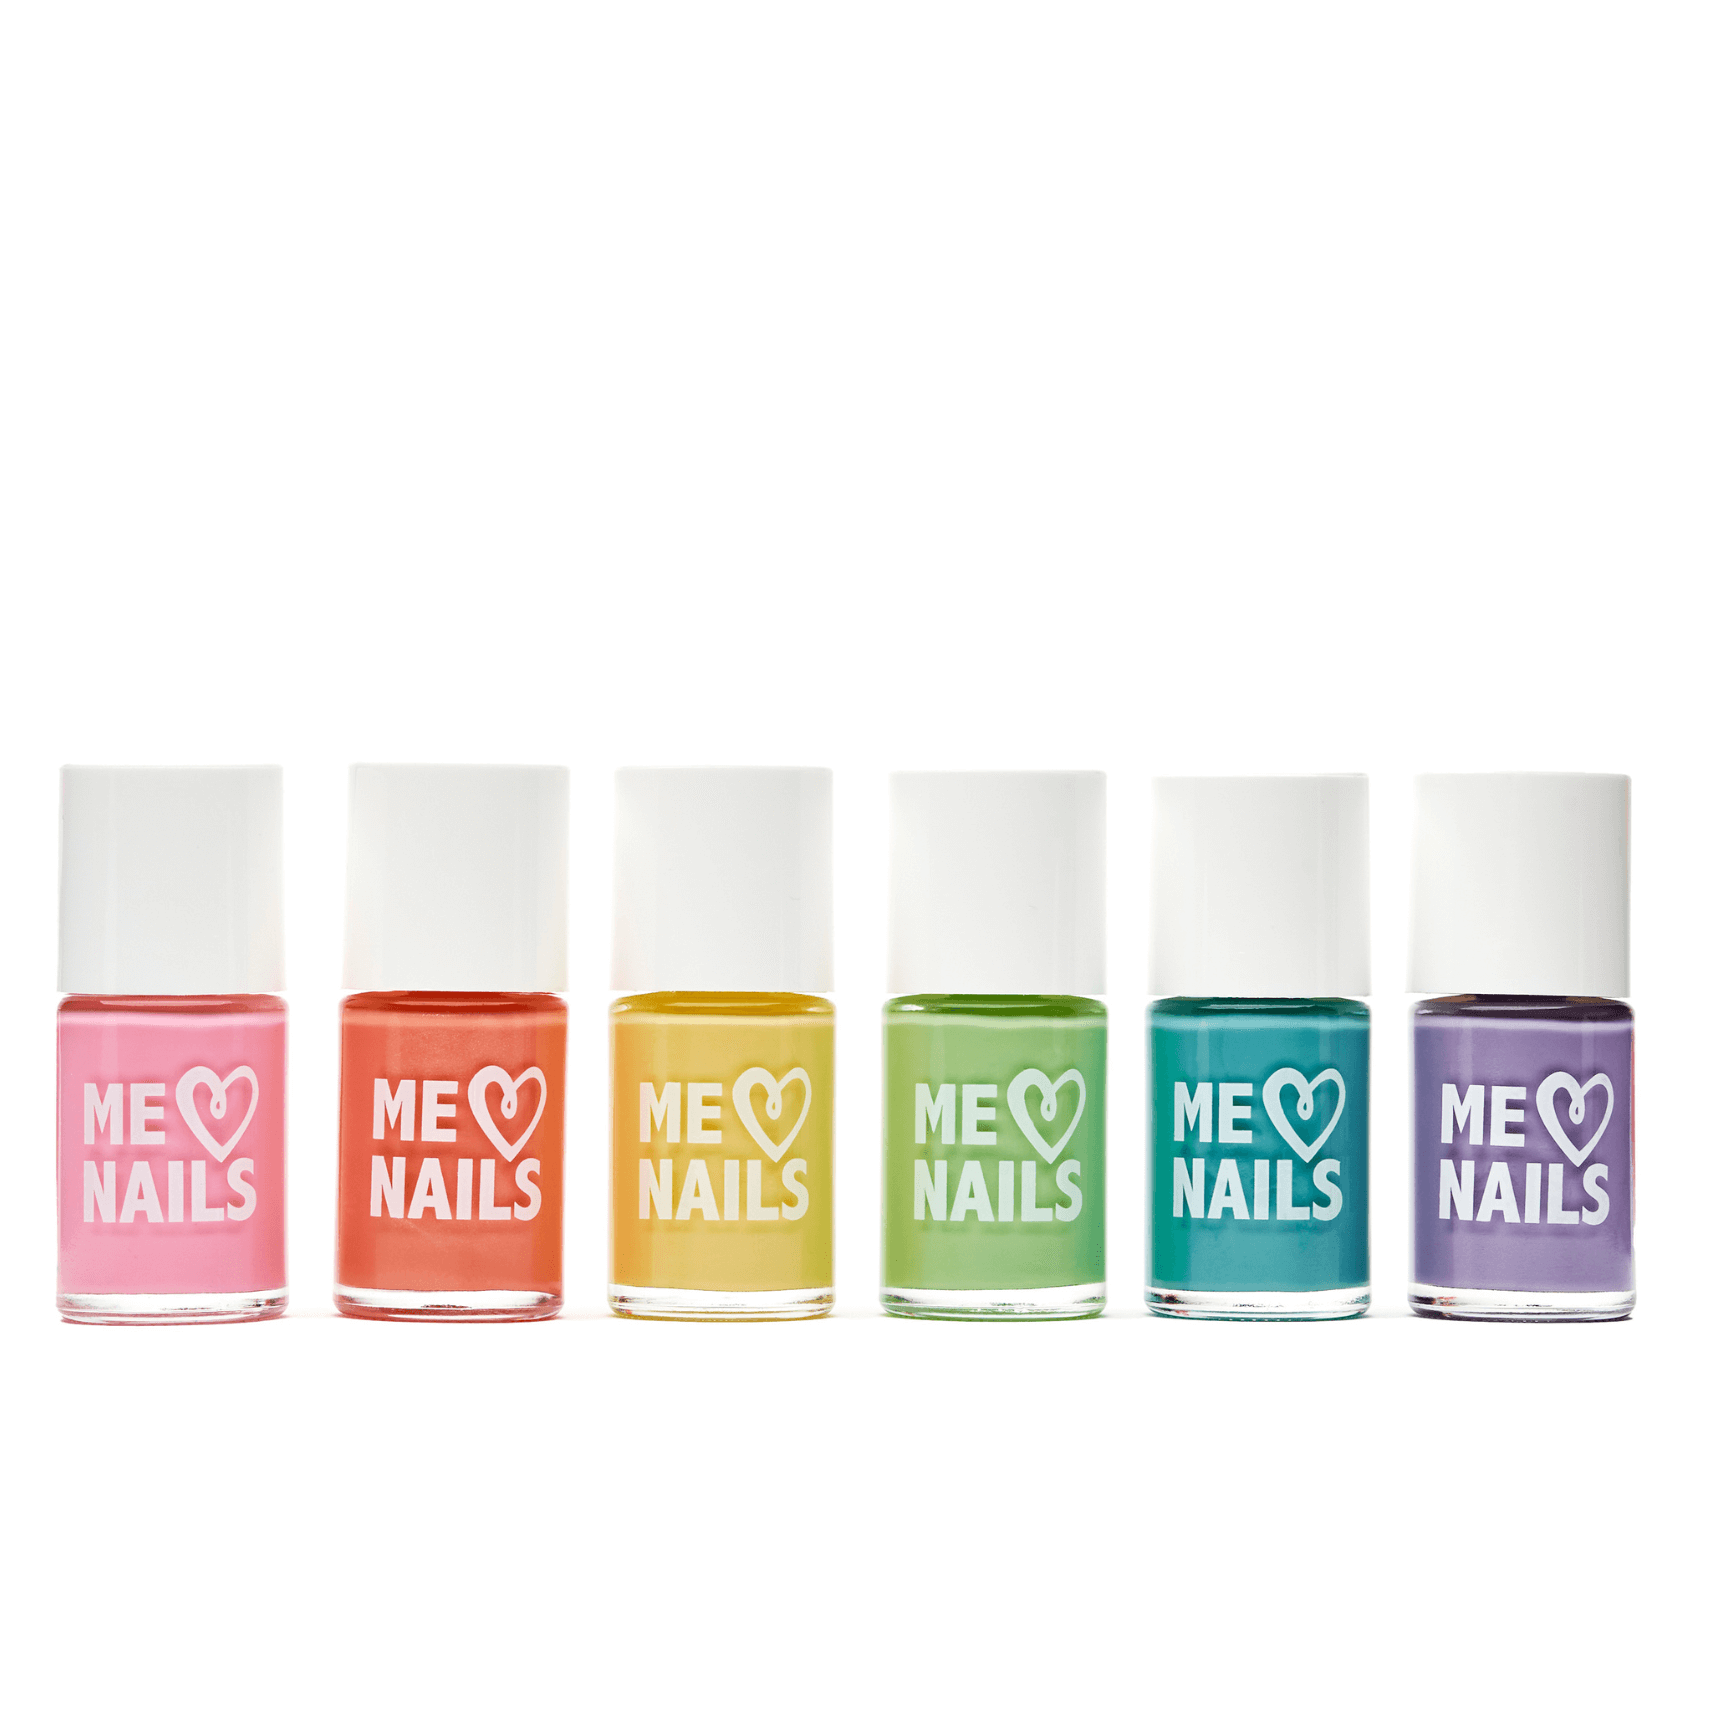 The best nail polish set for young woman.